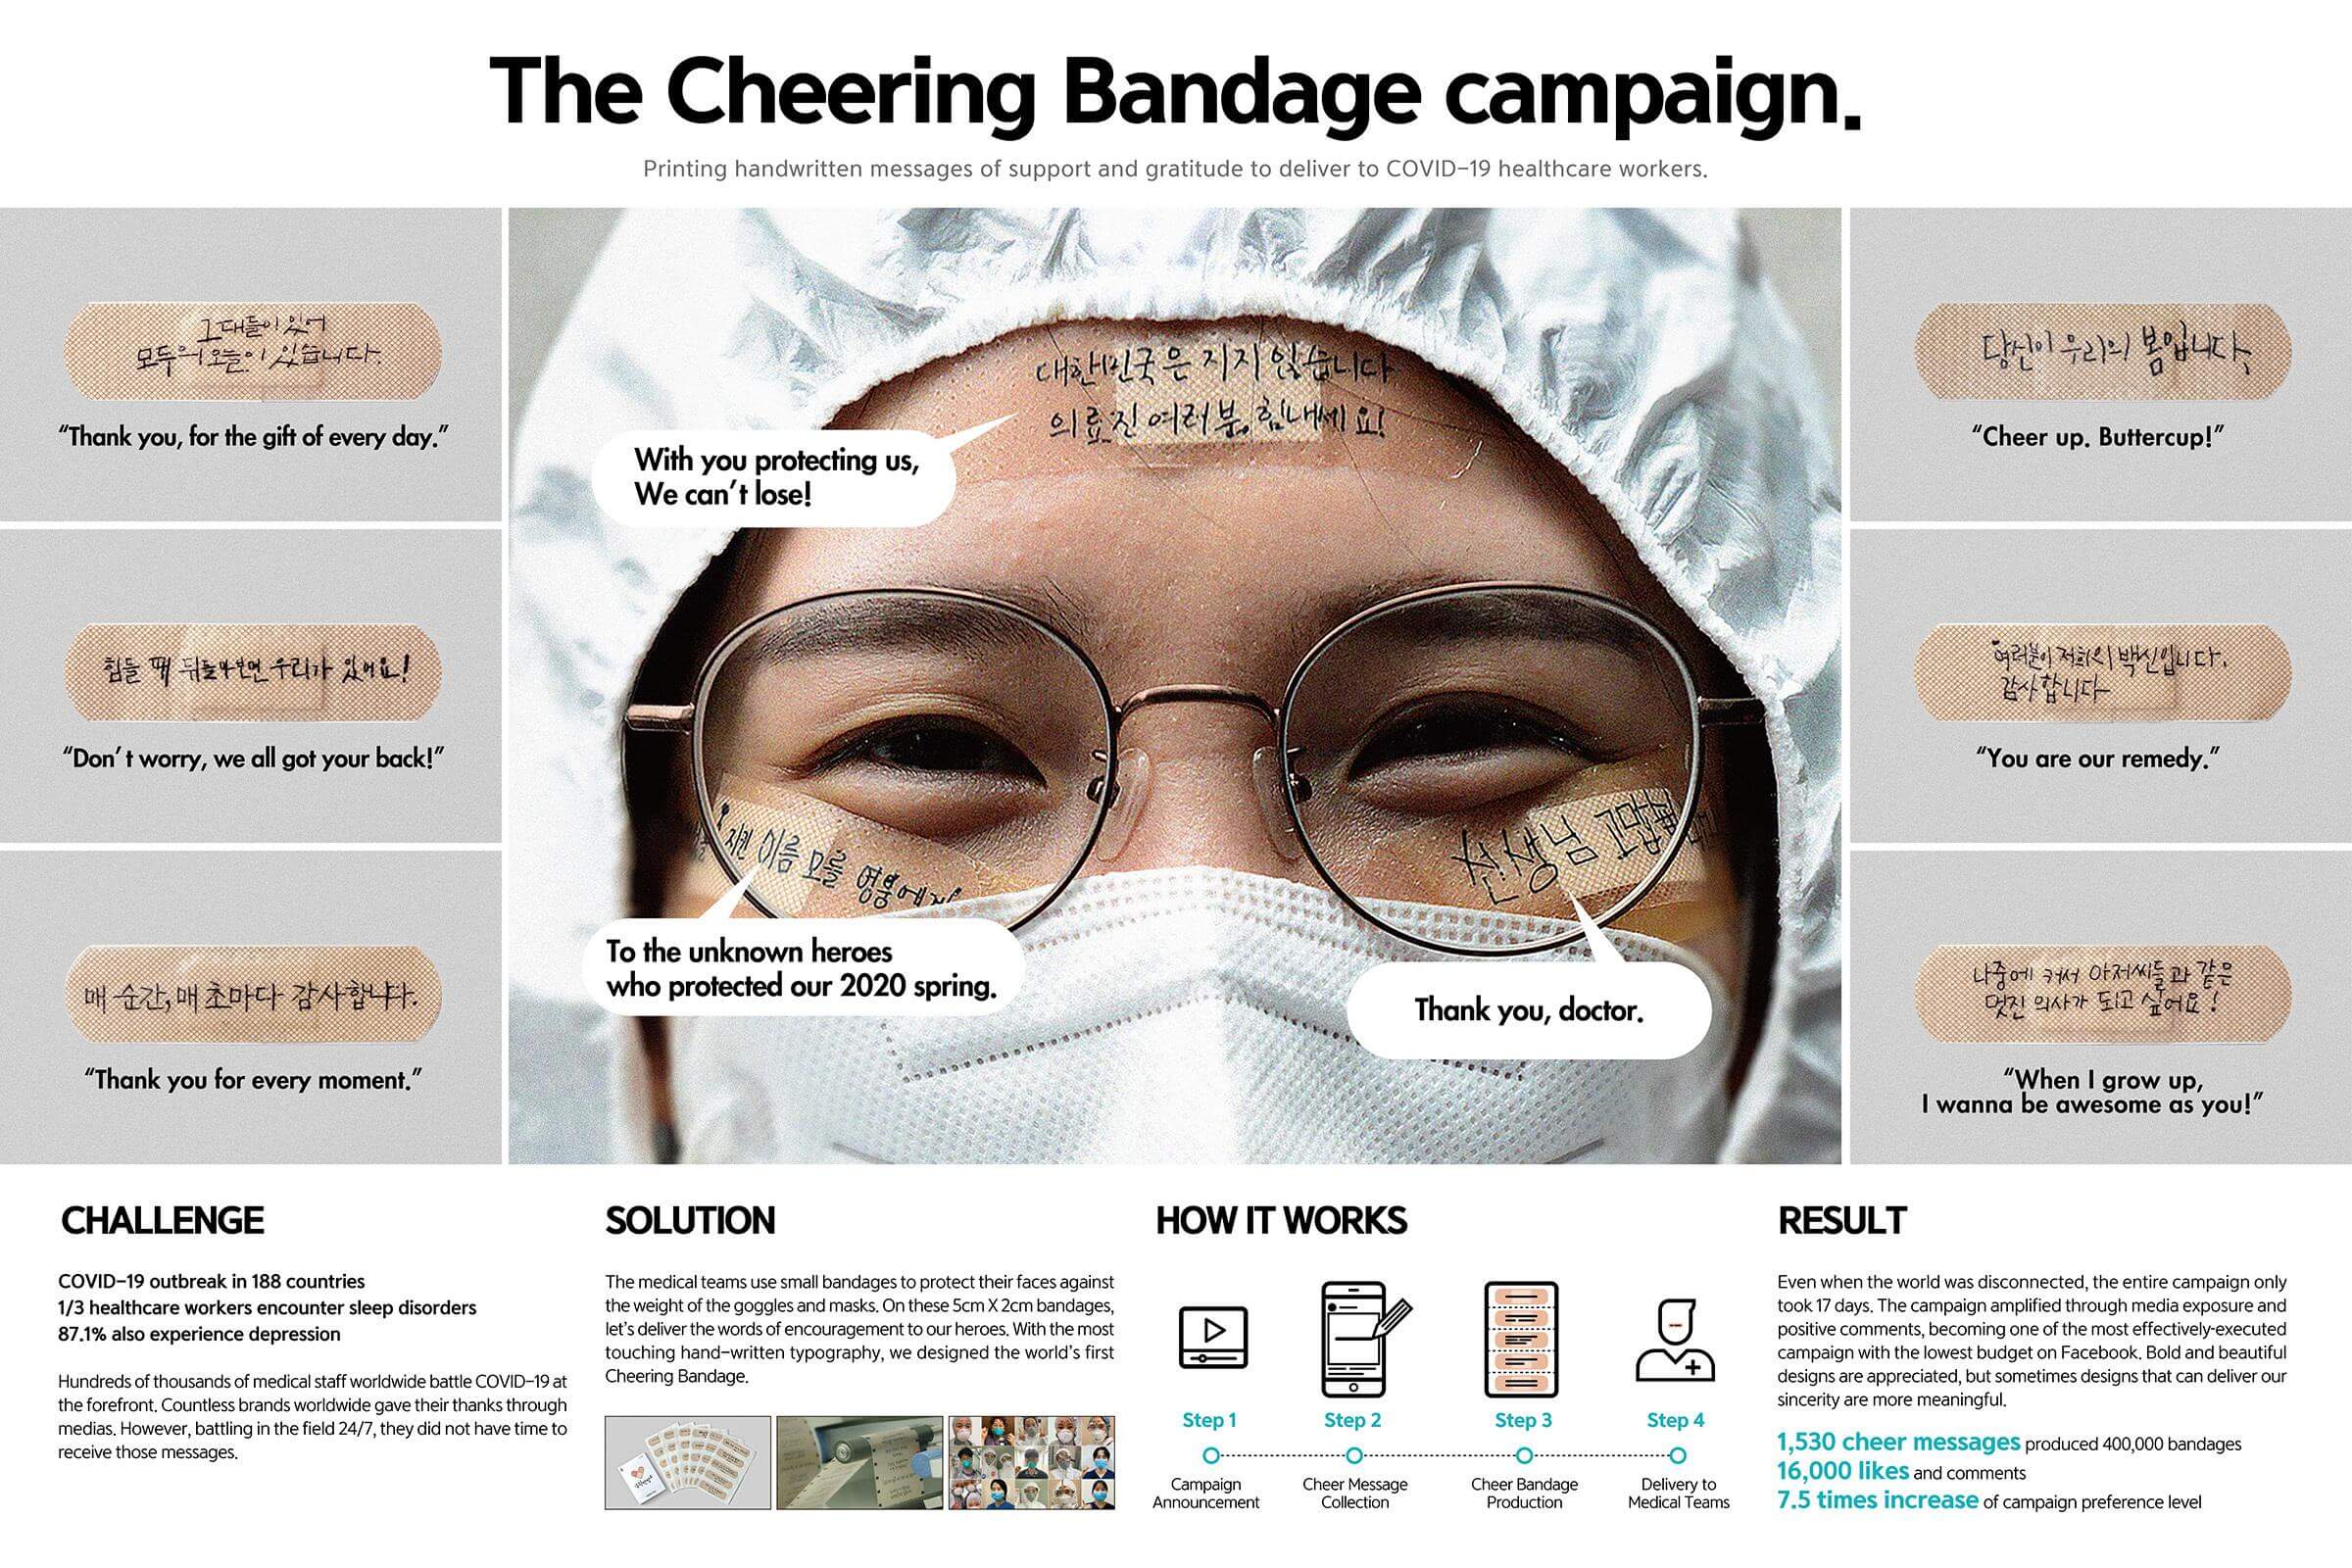 The Cheering Bandage by Facebook